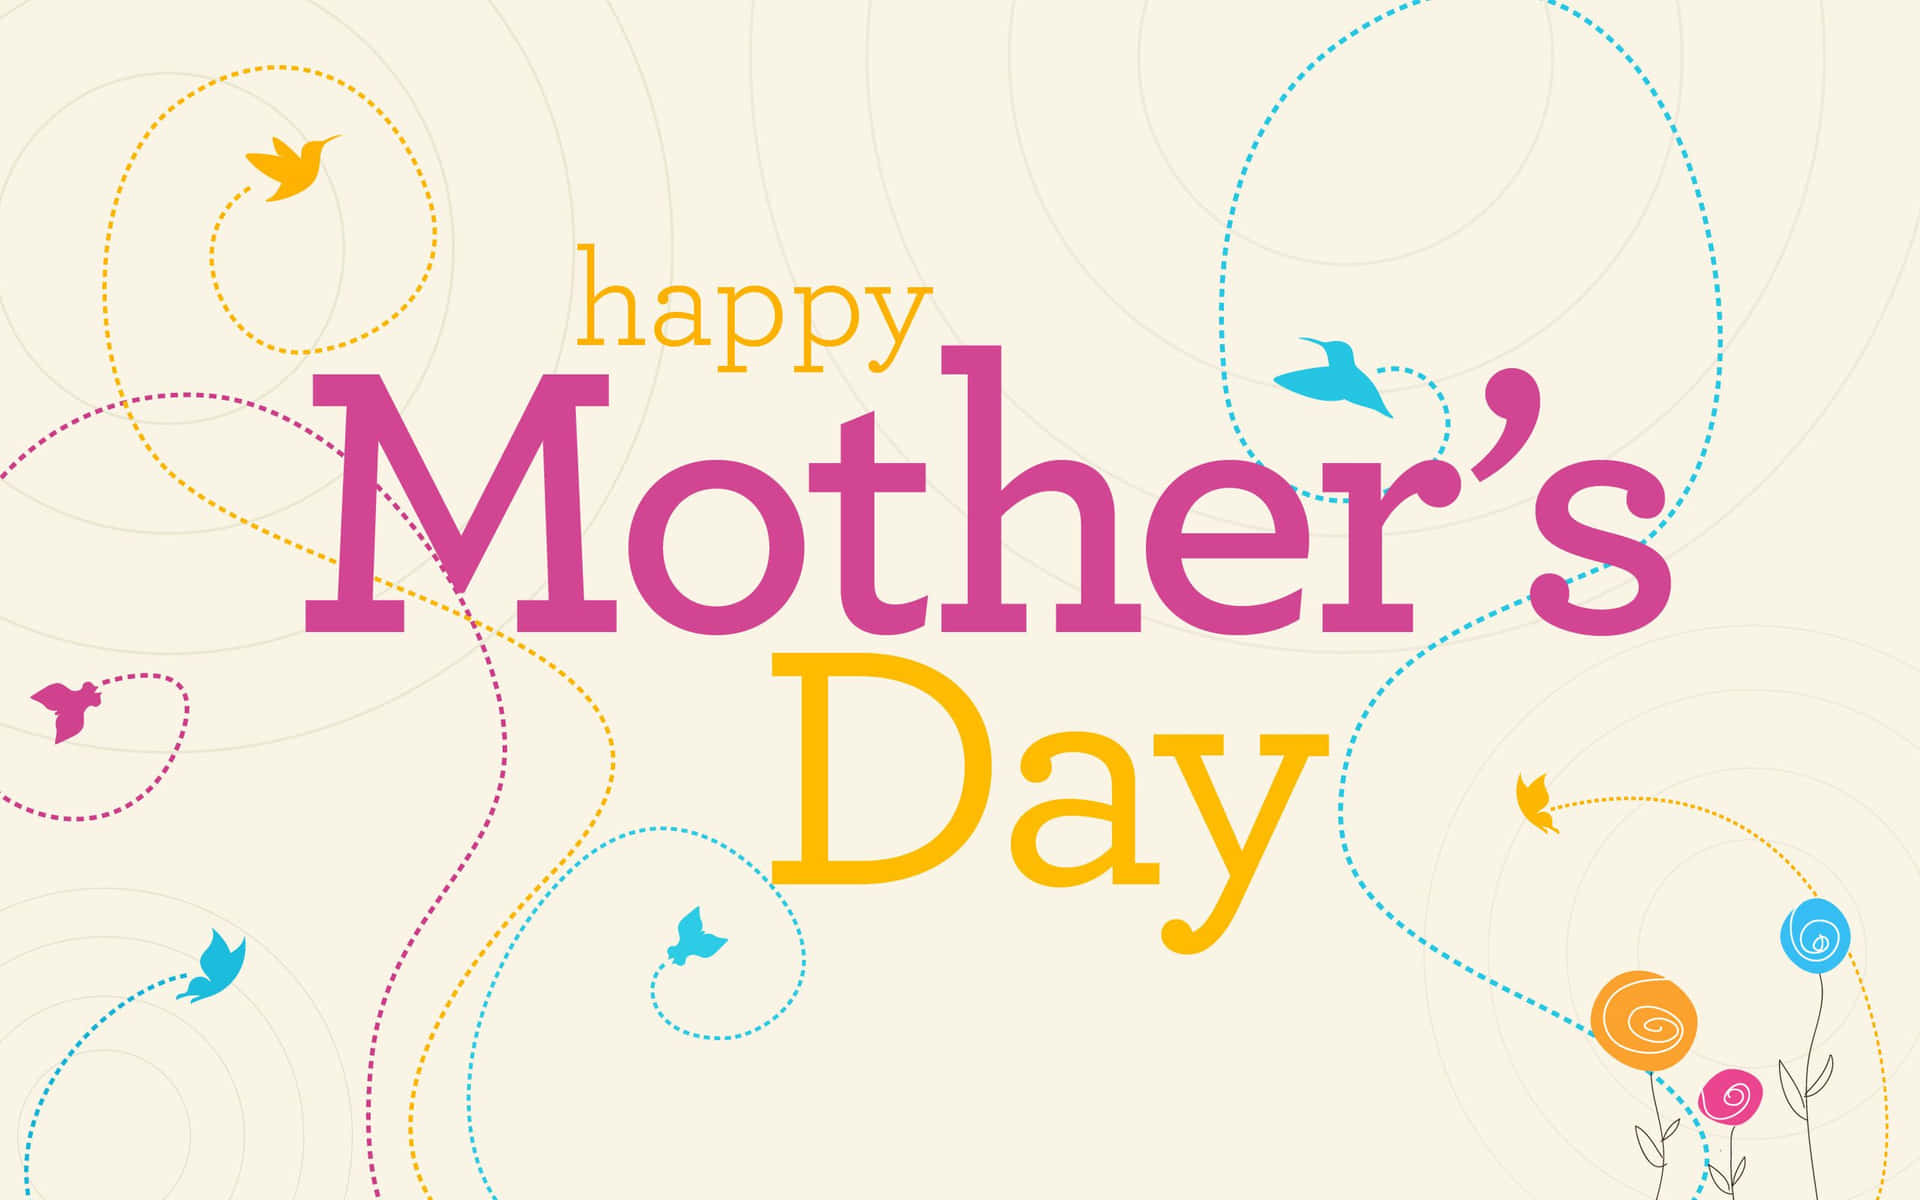 Celebrate Mom with love this Mother's Day